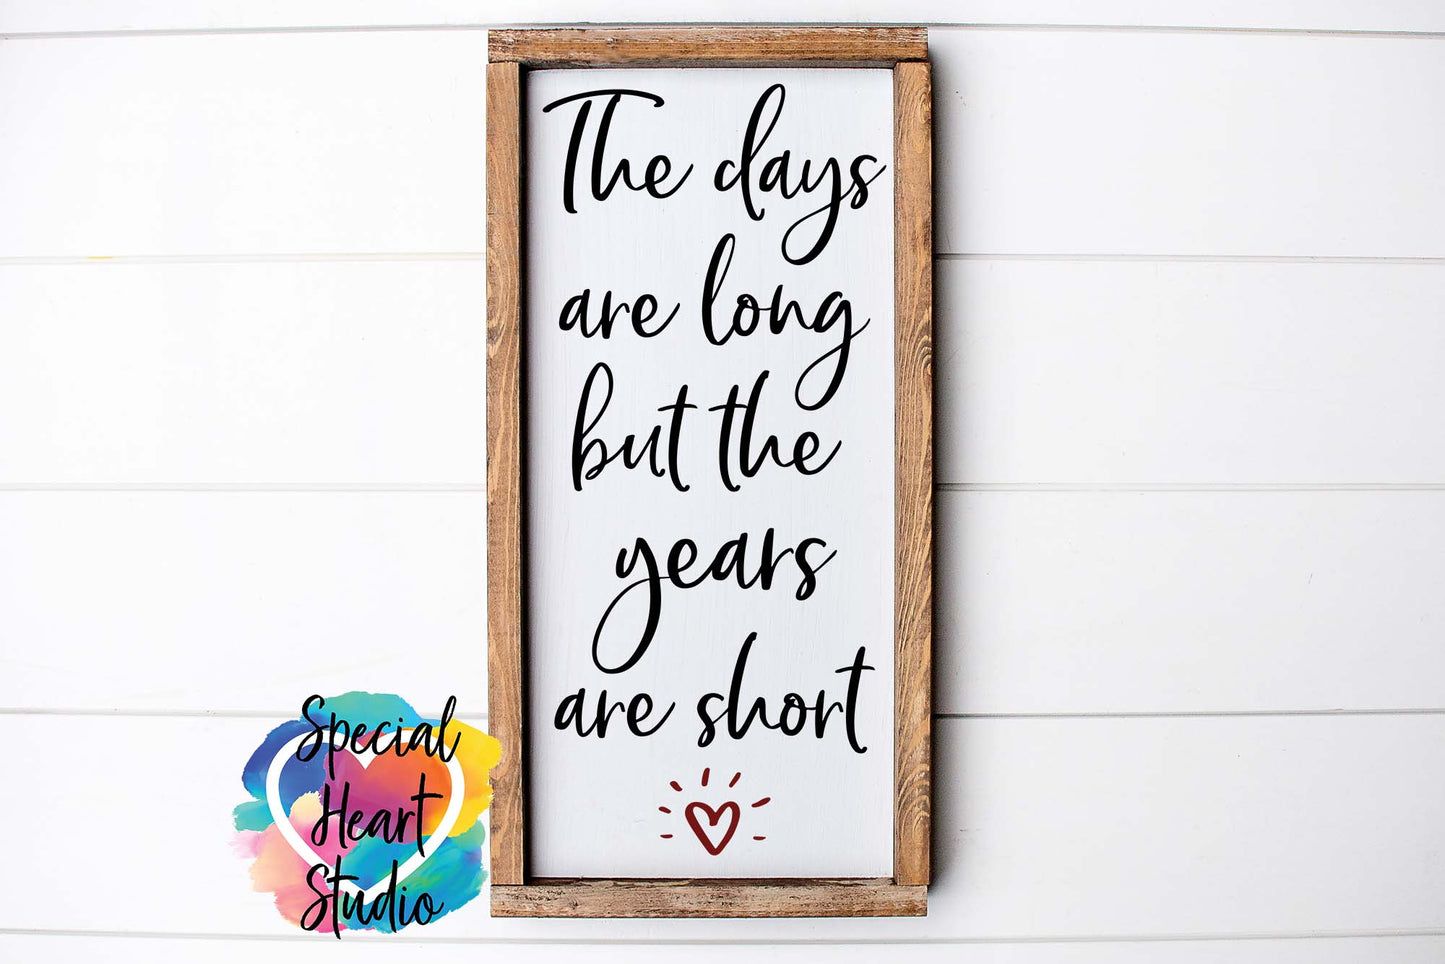 SVG file saying "The days are long but the years are short" on a sign mockup